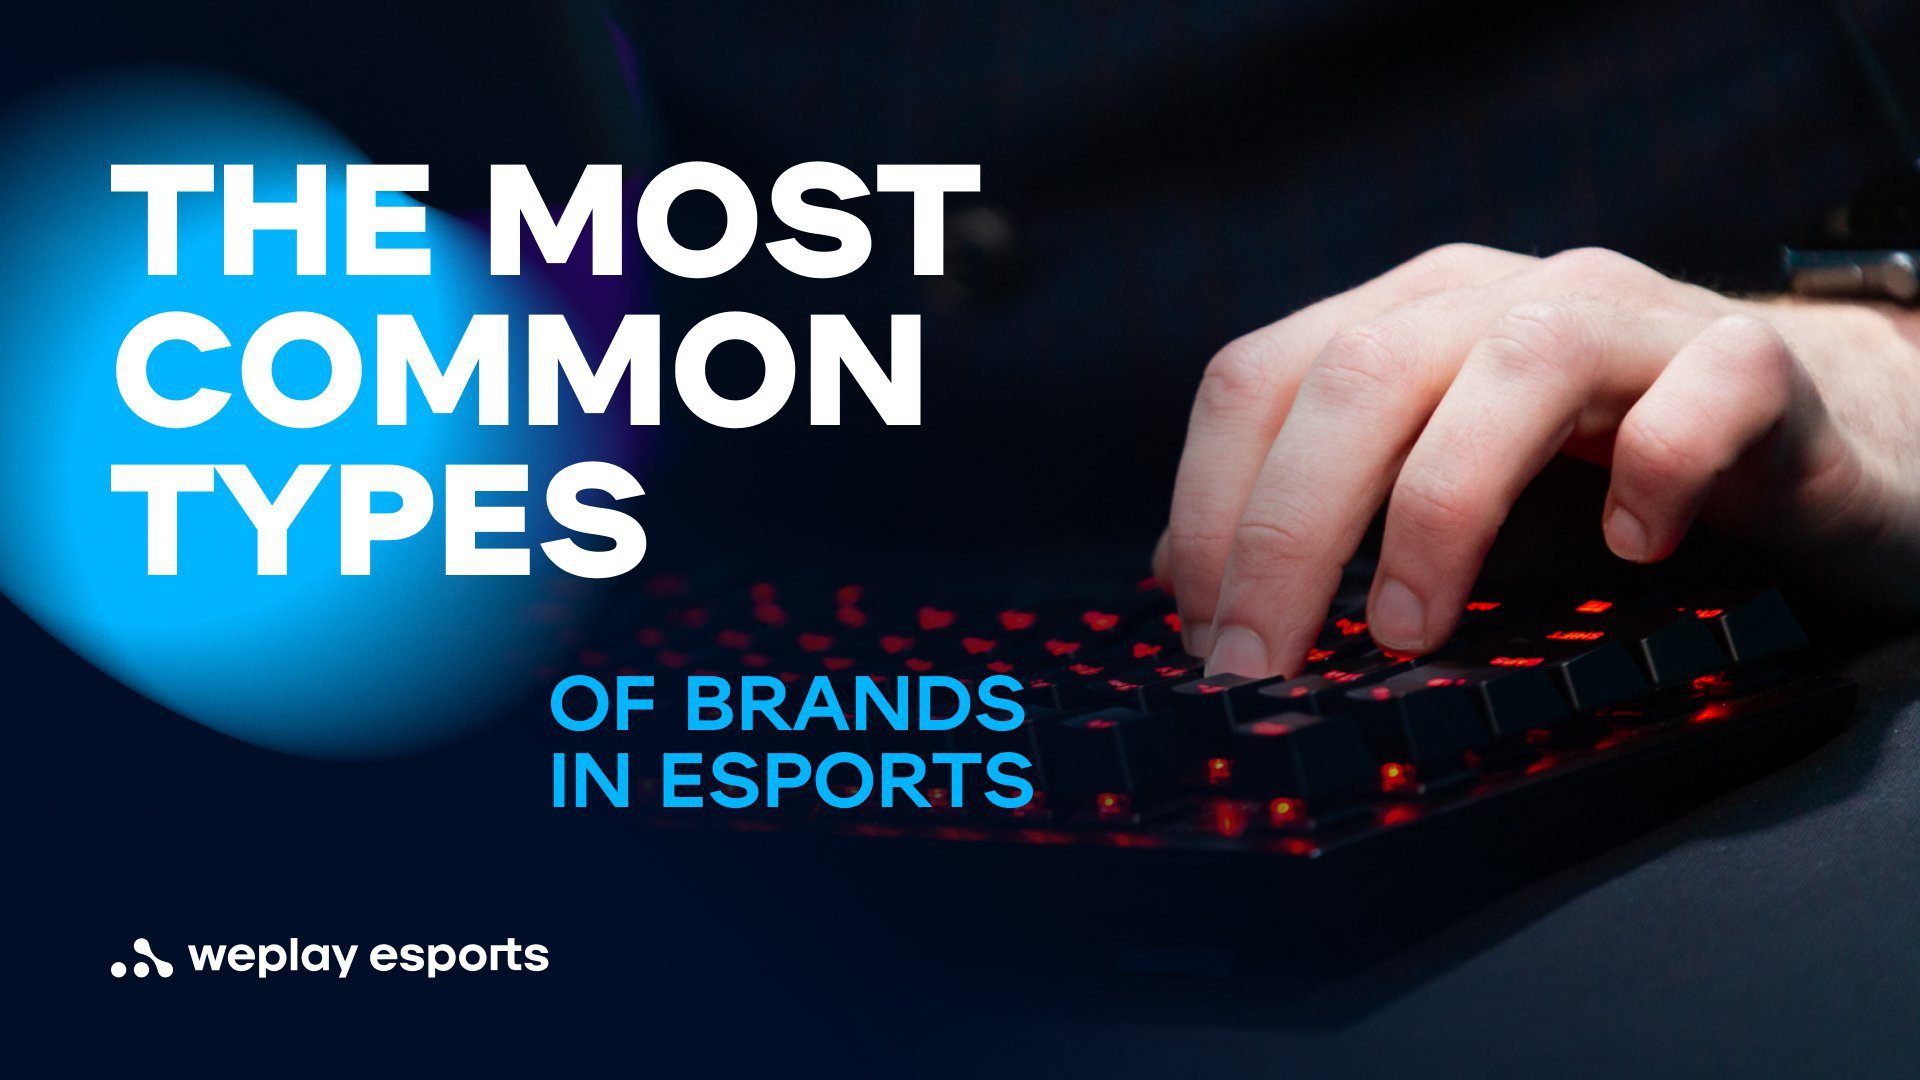 The most common types of brands in esports. Image: WePlay Holding